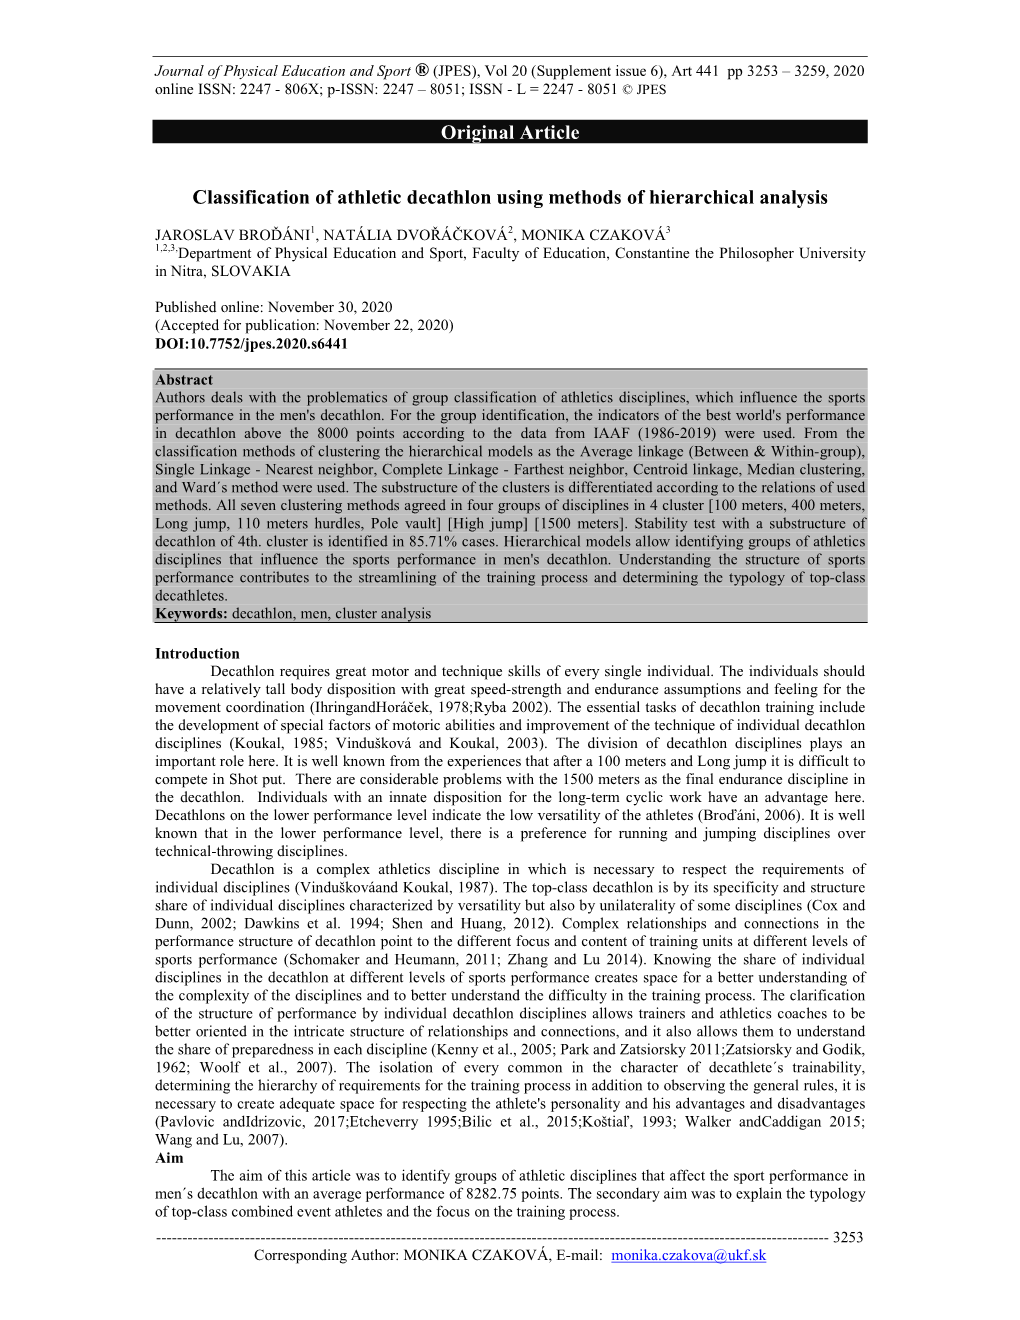 Original Article Classification of Athletic Decathlon Using Methods of Hierarchical Analysis